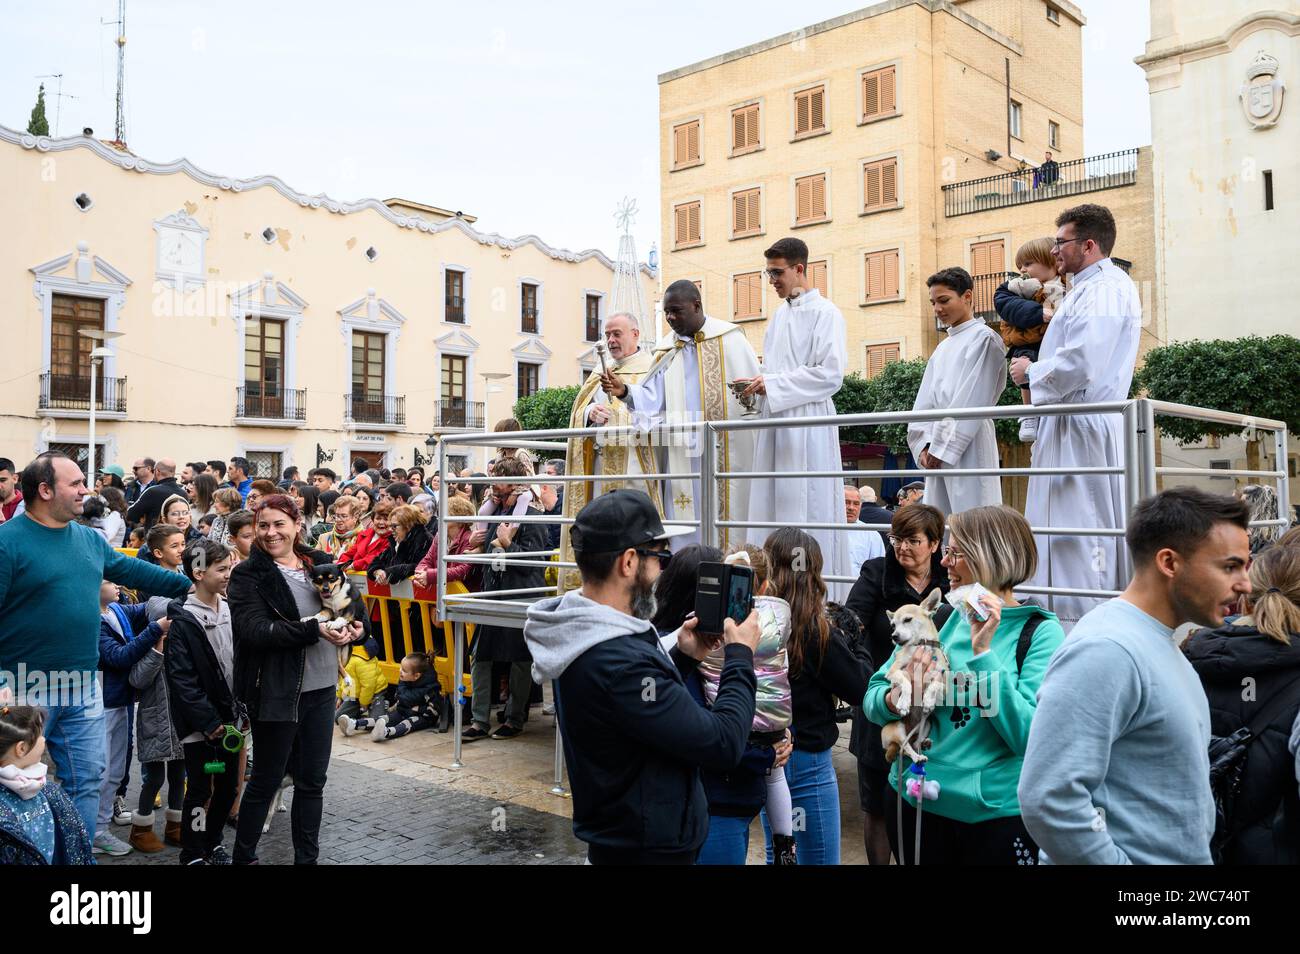 Celebration of St. Anthony's Day with the blessing of the animals by the priests in the street in front of the church, in Alginet, Valencia, Spain Stock Photo